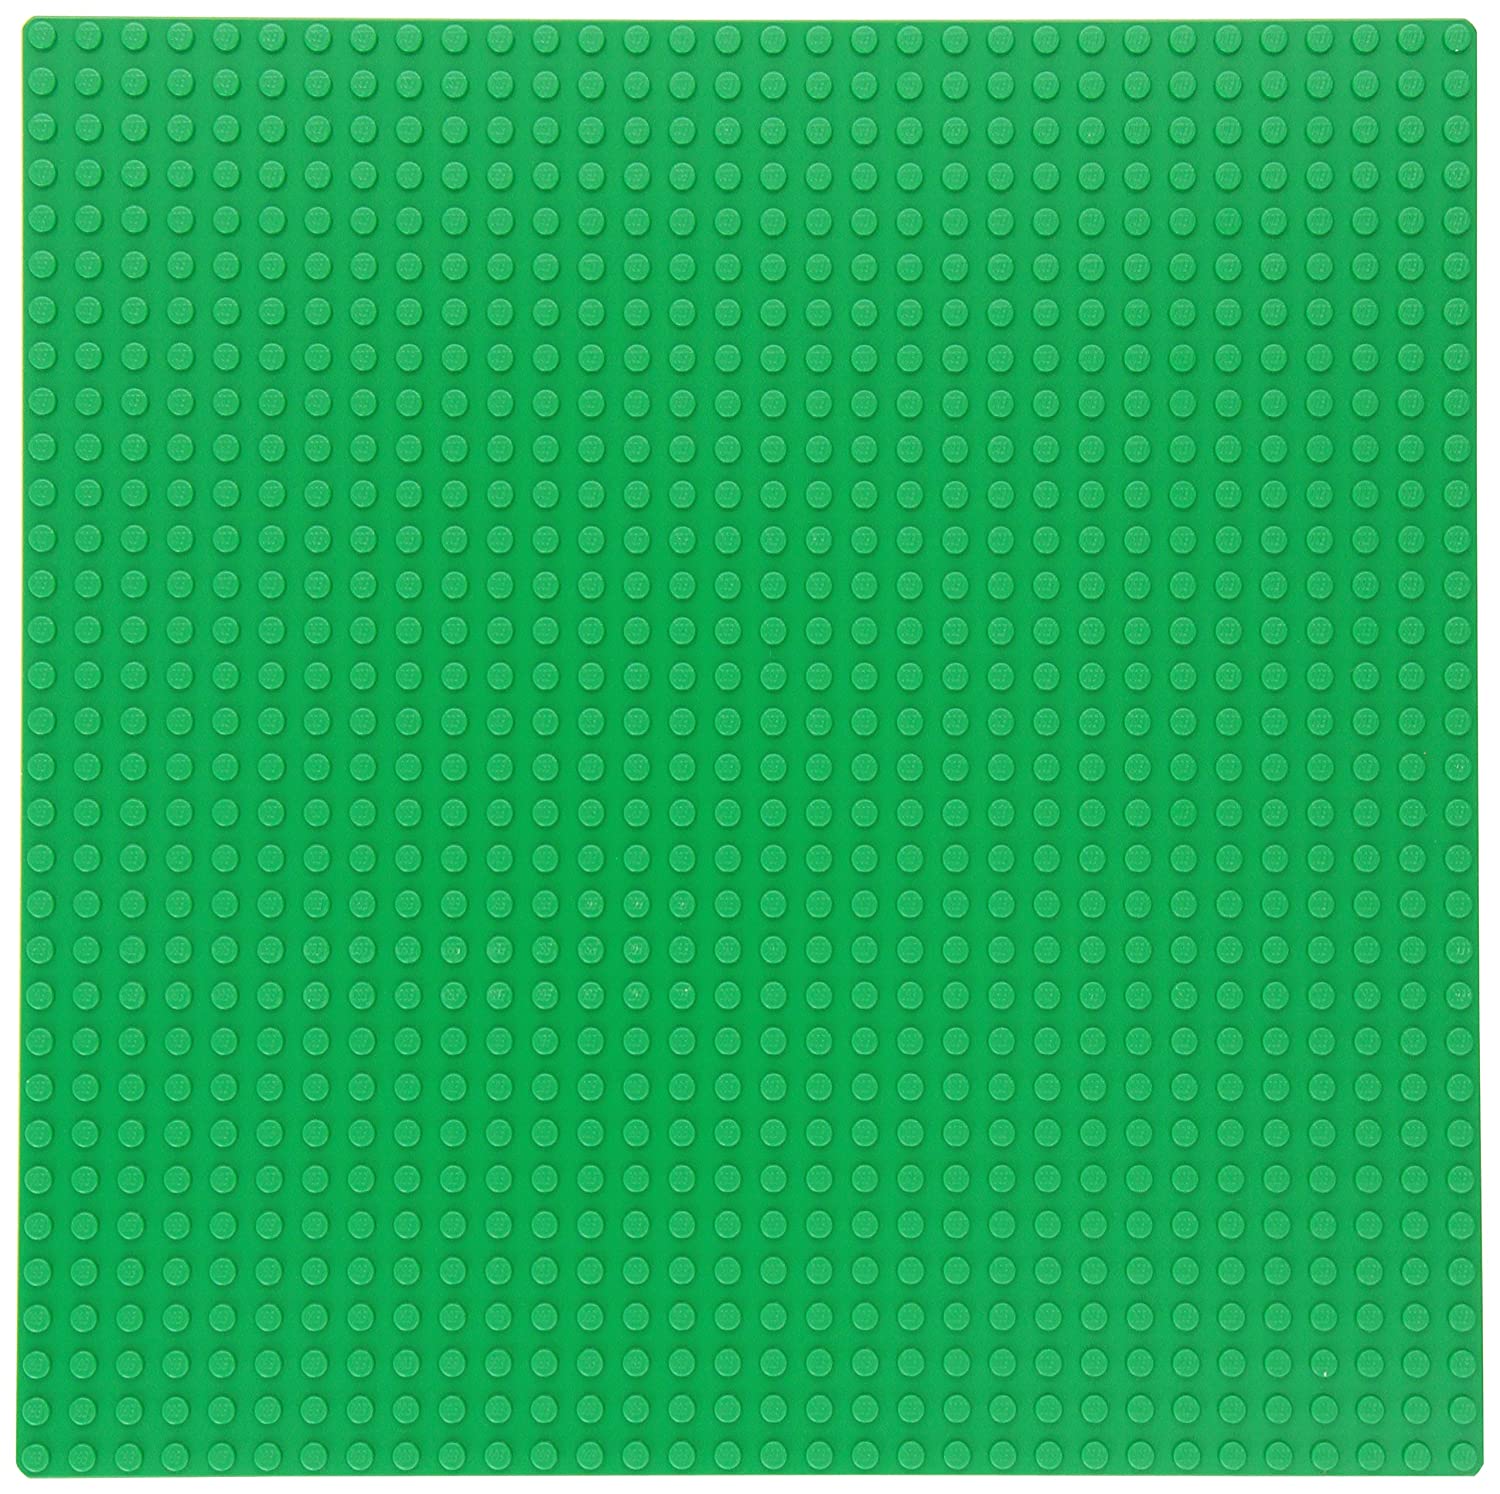 LEGO 626 Green Building Plate (10" x 10") (Discontinued by manufacturer)